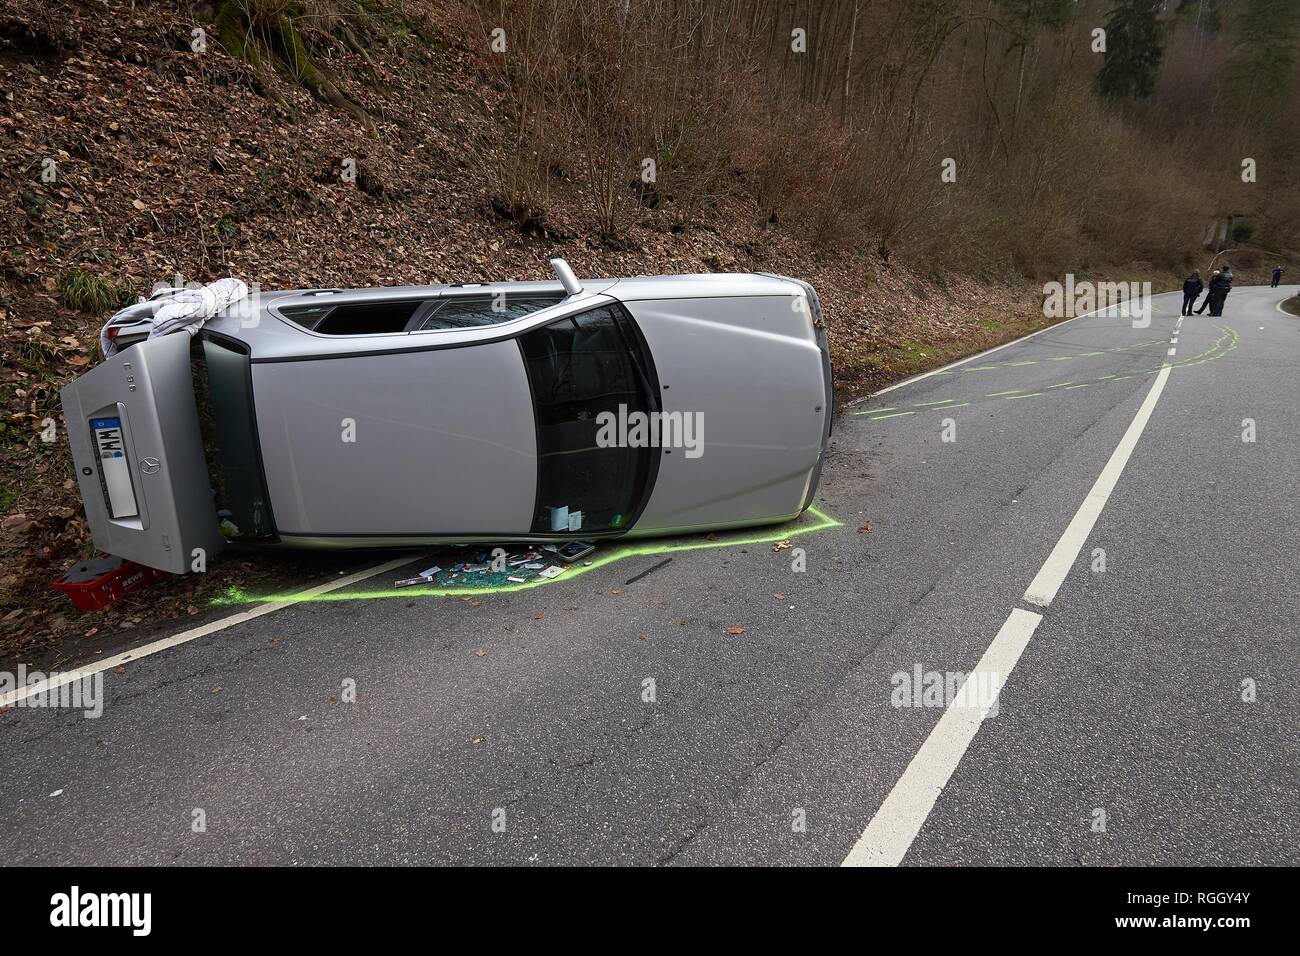 A car overturned in an accident on the L307 Vallendar between Vallendar and Höhr-Grenzhausen. Four people were injured Stock Photo